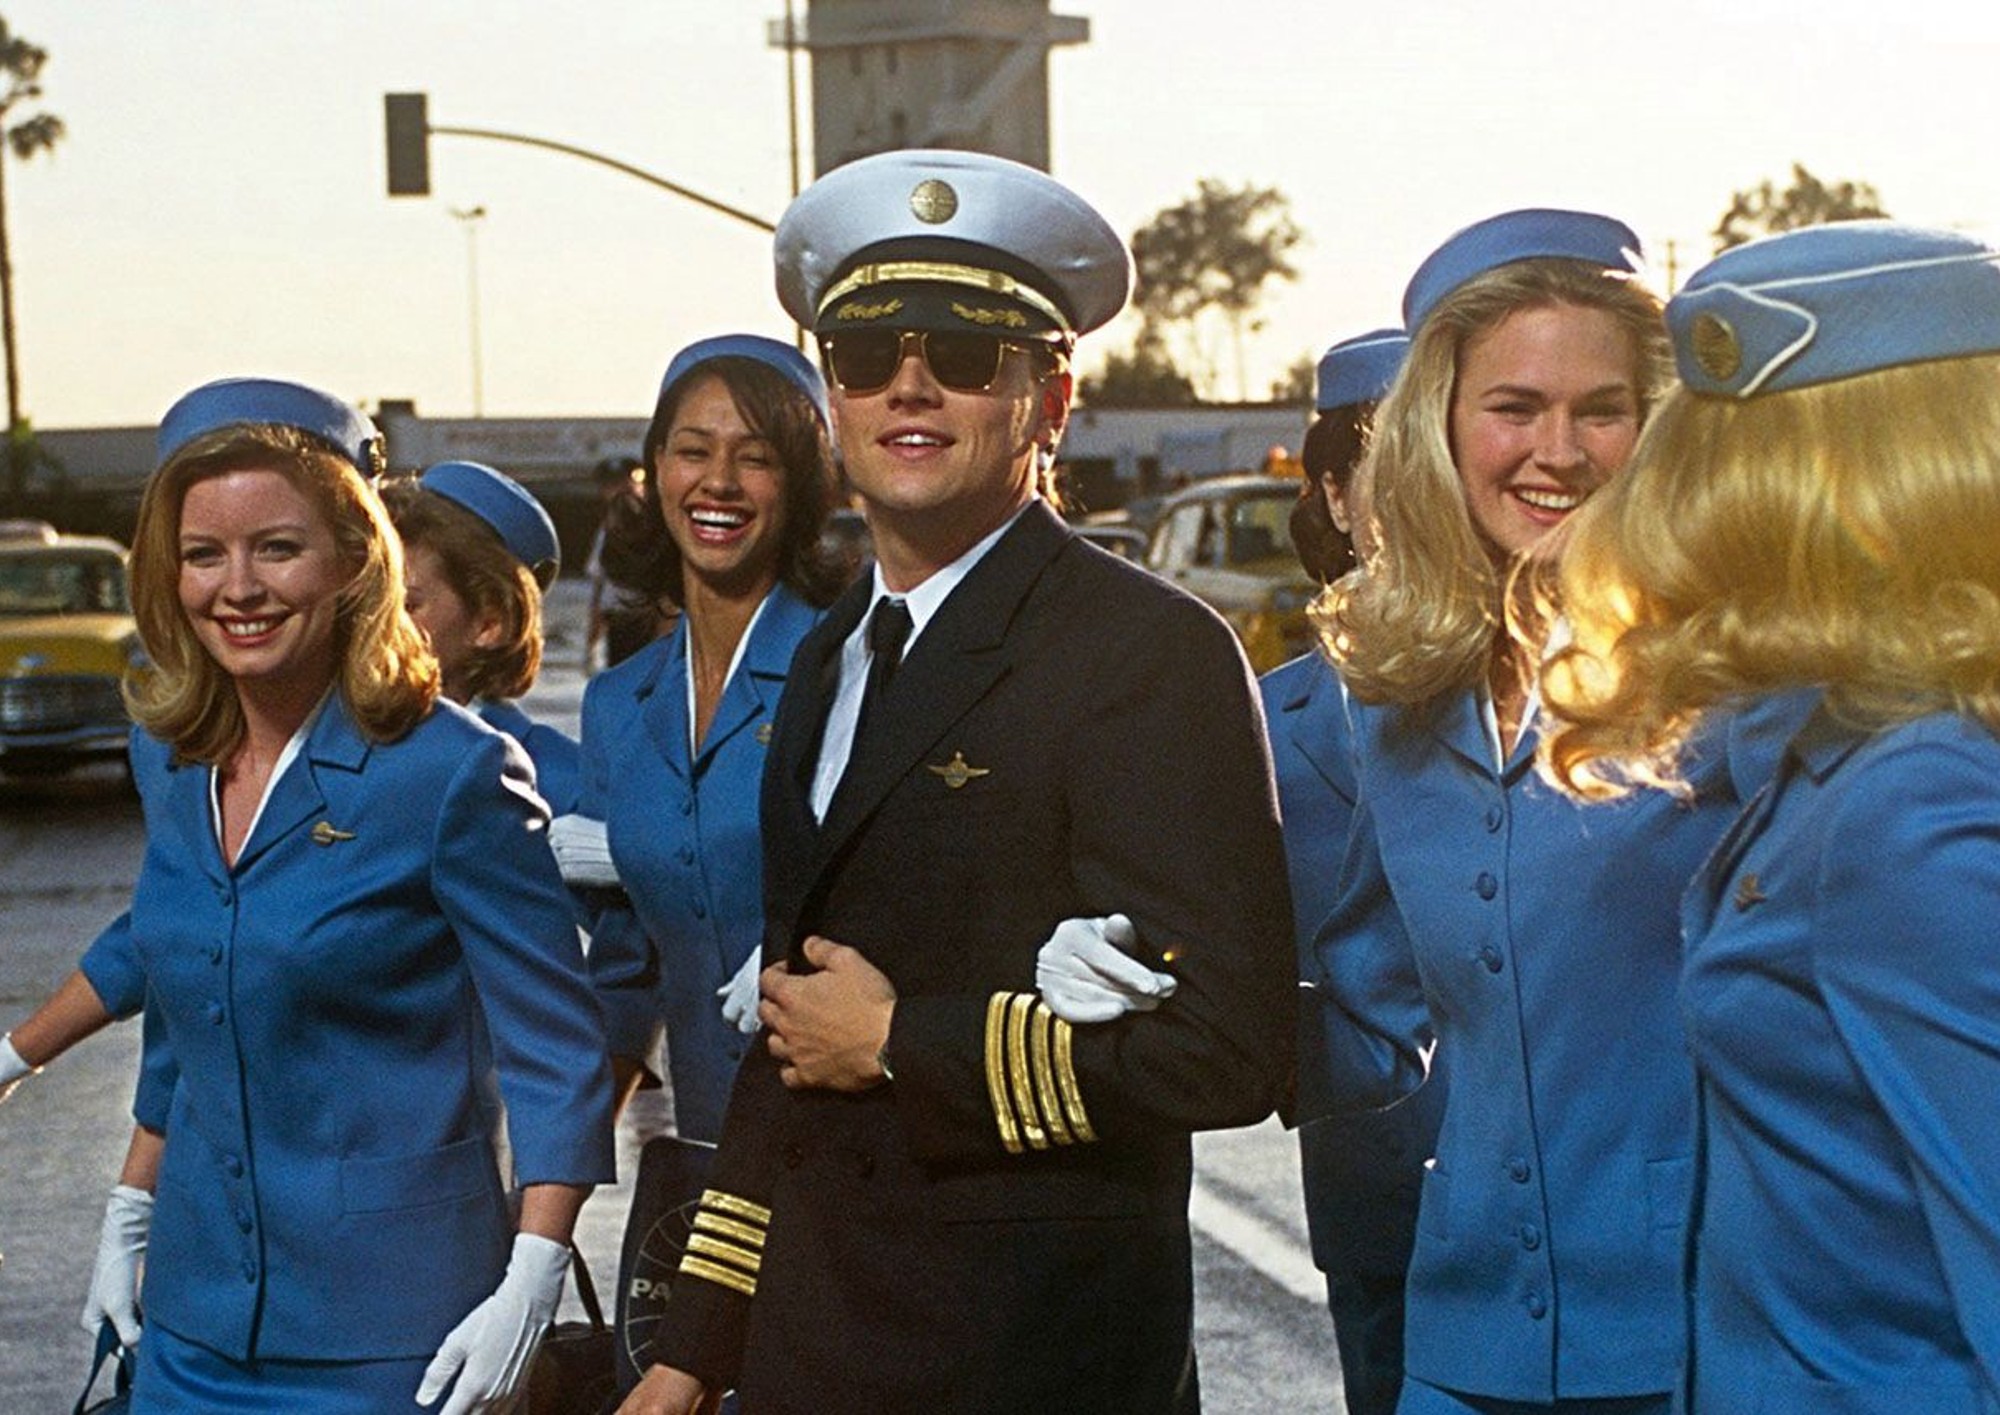 Image from the motion picture Catch Me If You Can